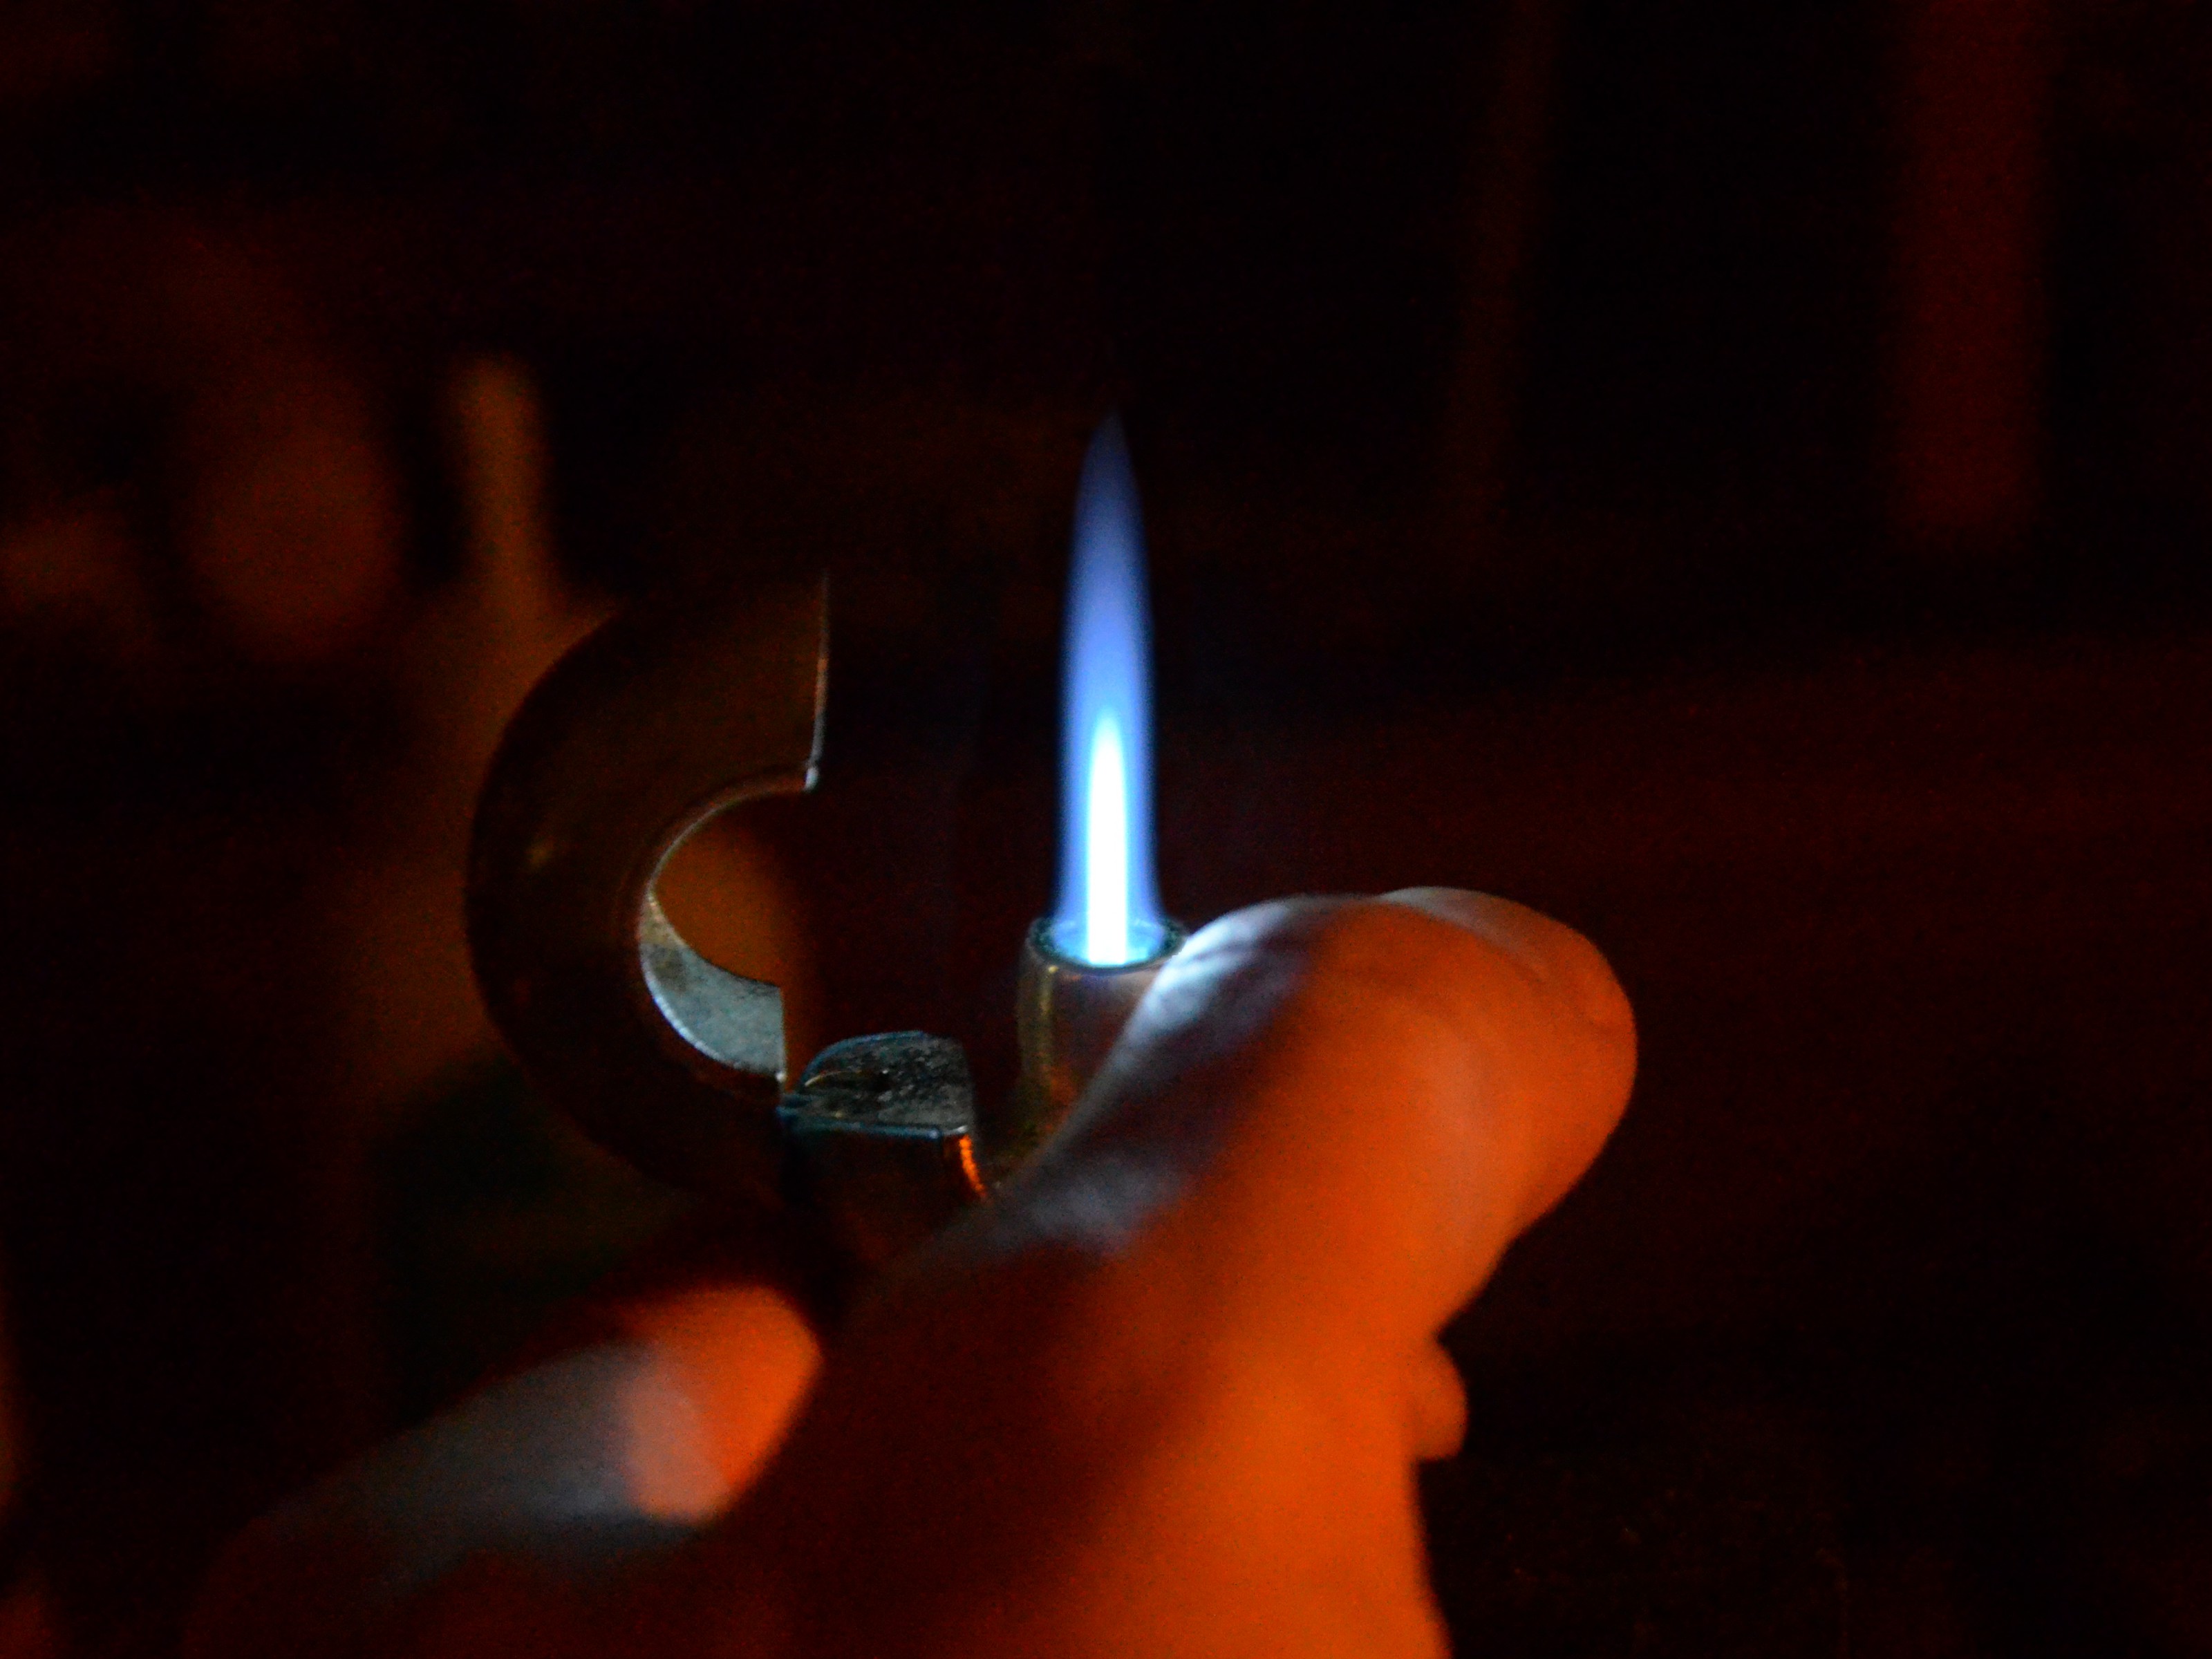 File:Gas lighter flame.jpg - Wikimedia Commons